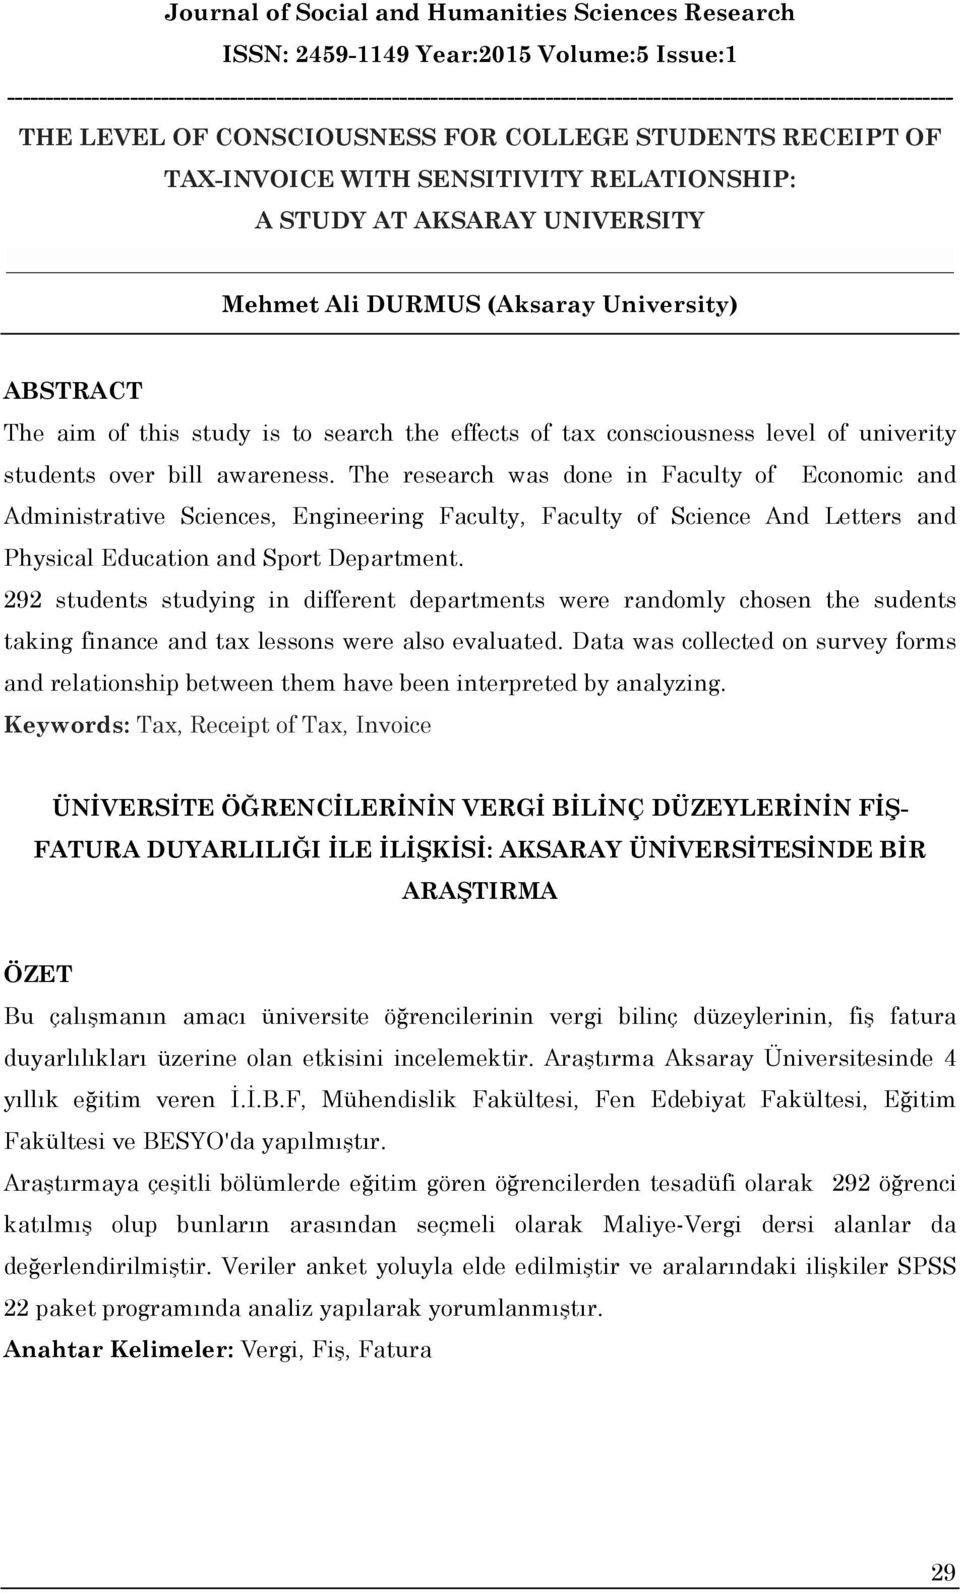 The research was done in Faculty of Economic and Administrative Sciences, Engineering Faculty, Faculty of Science And Letters and Physical Education and Sport Department.